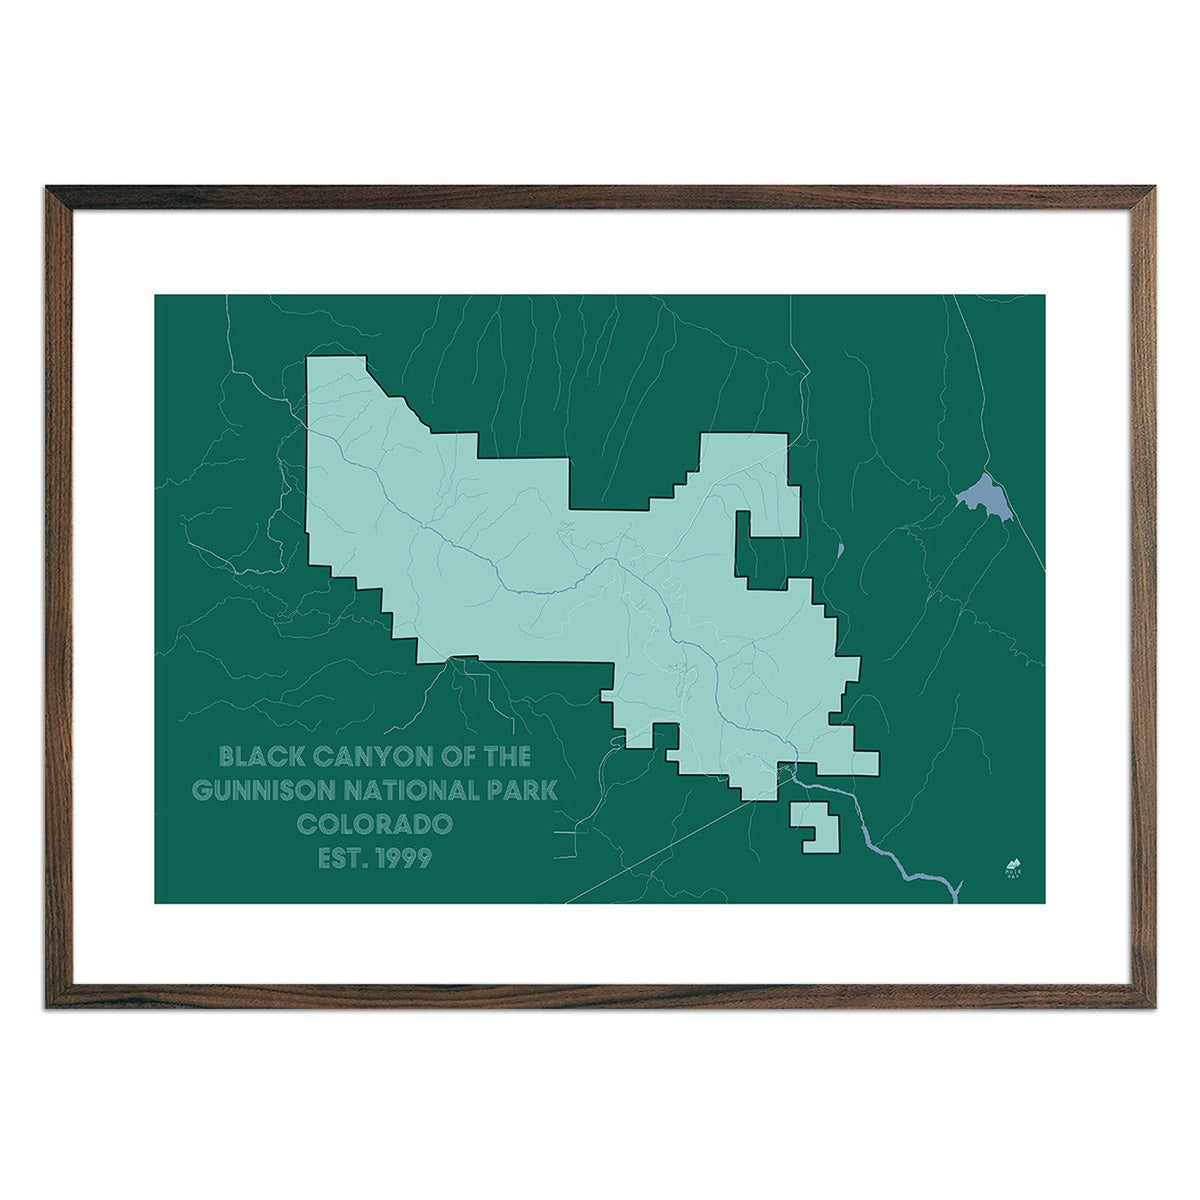 Black Canyon of the Gunnison National Park Map